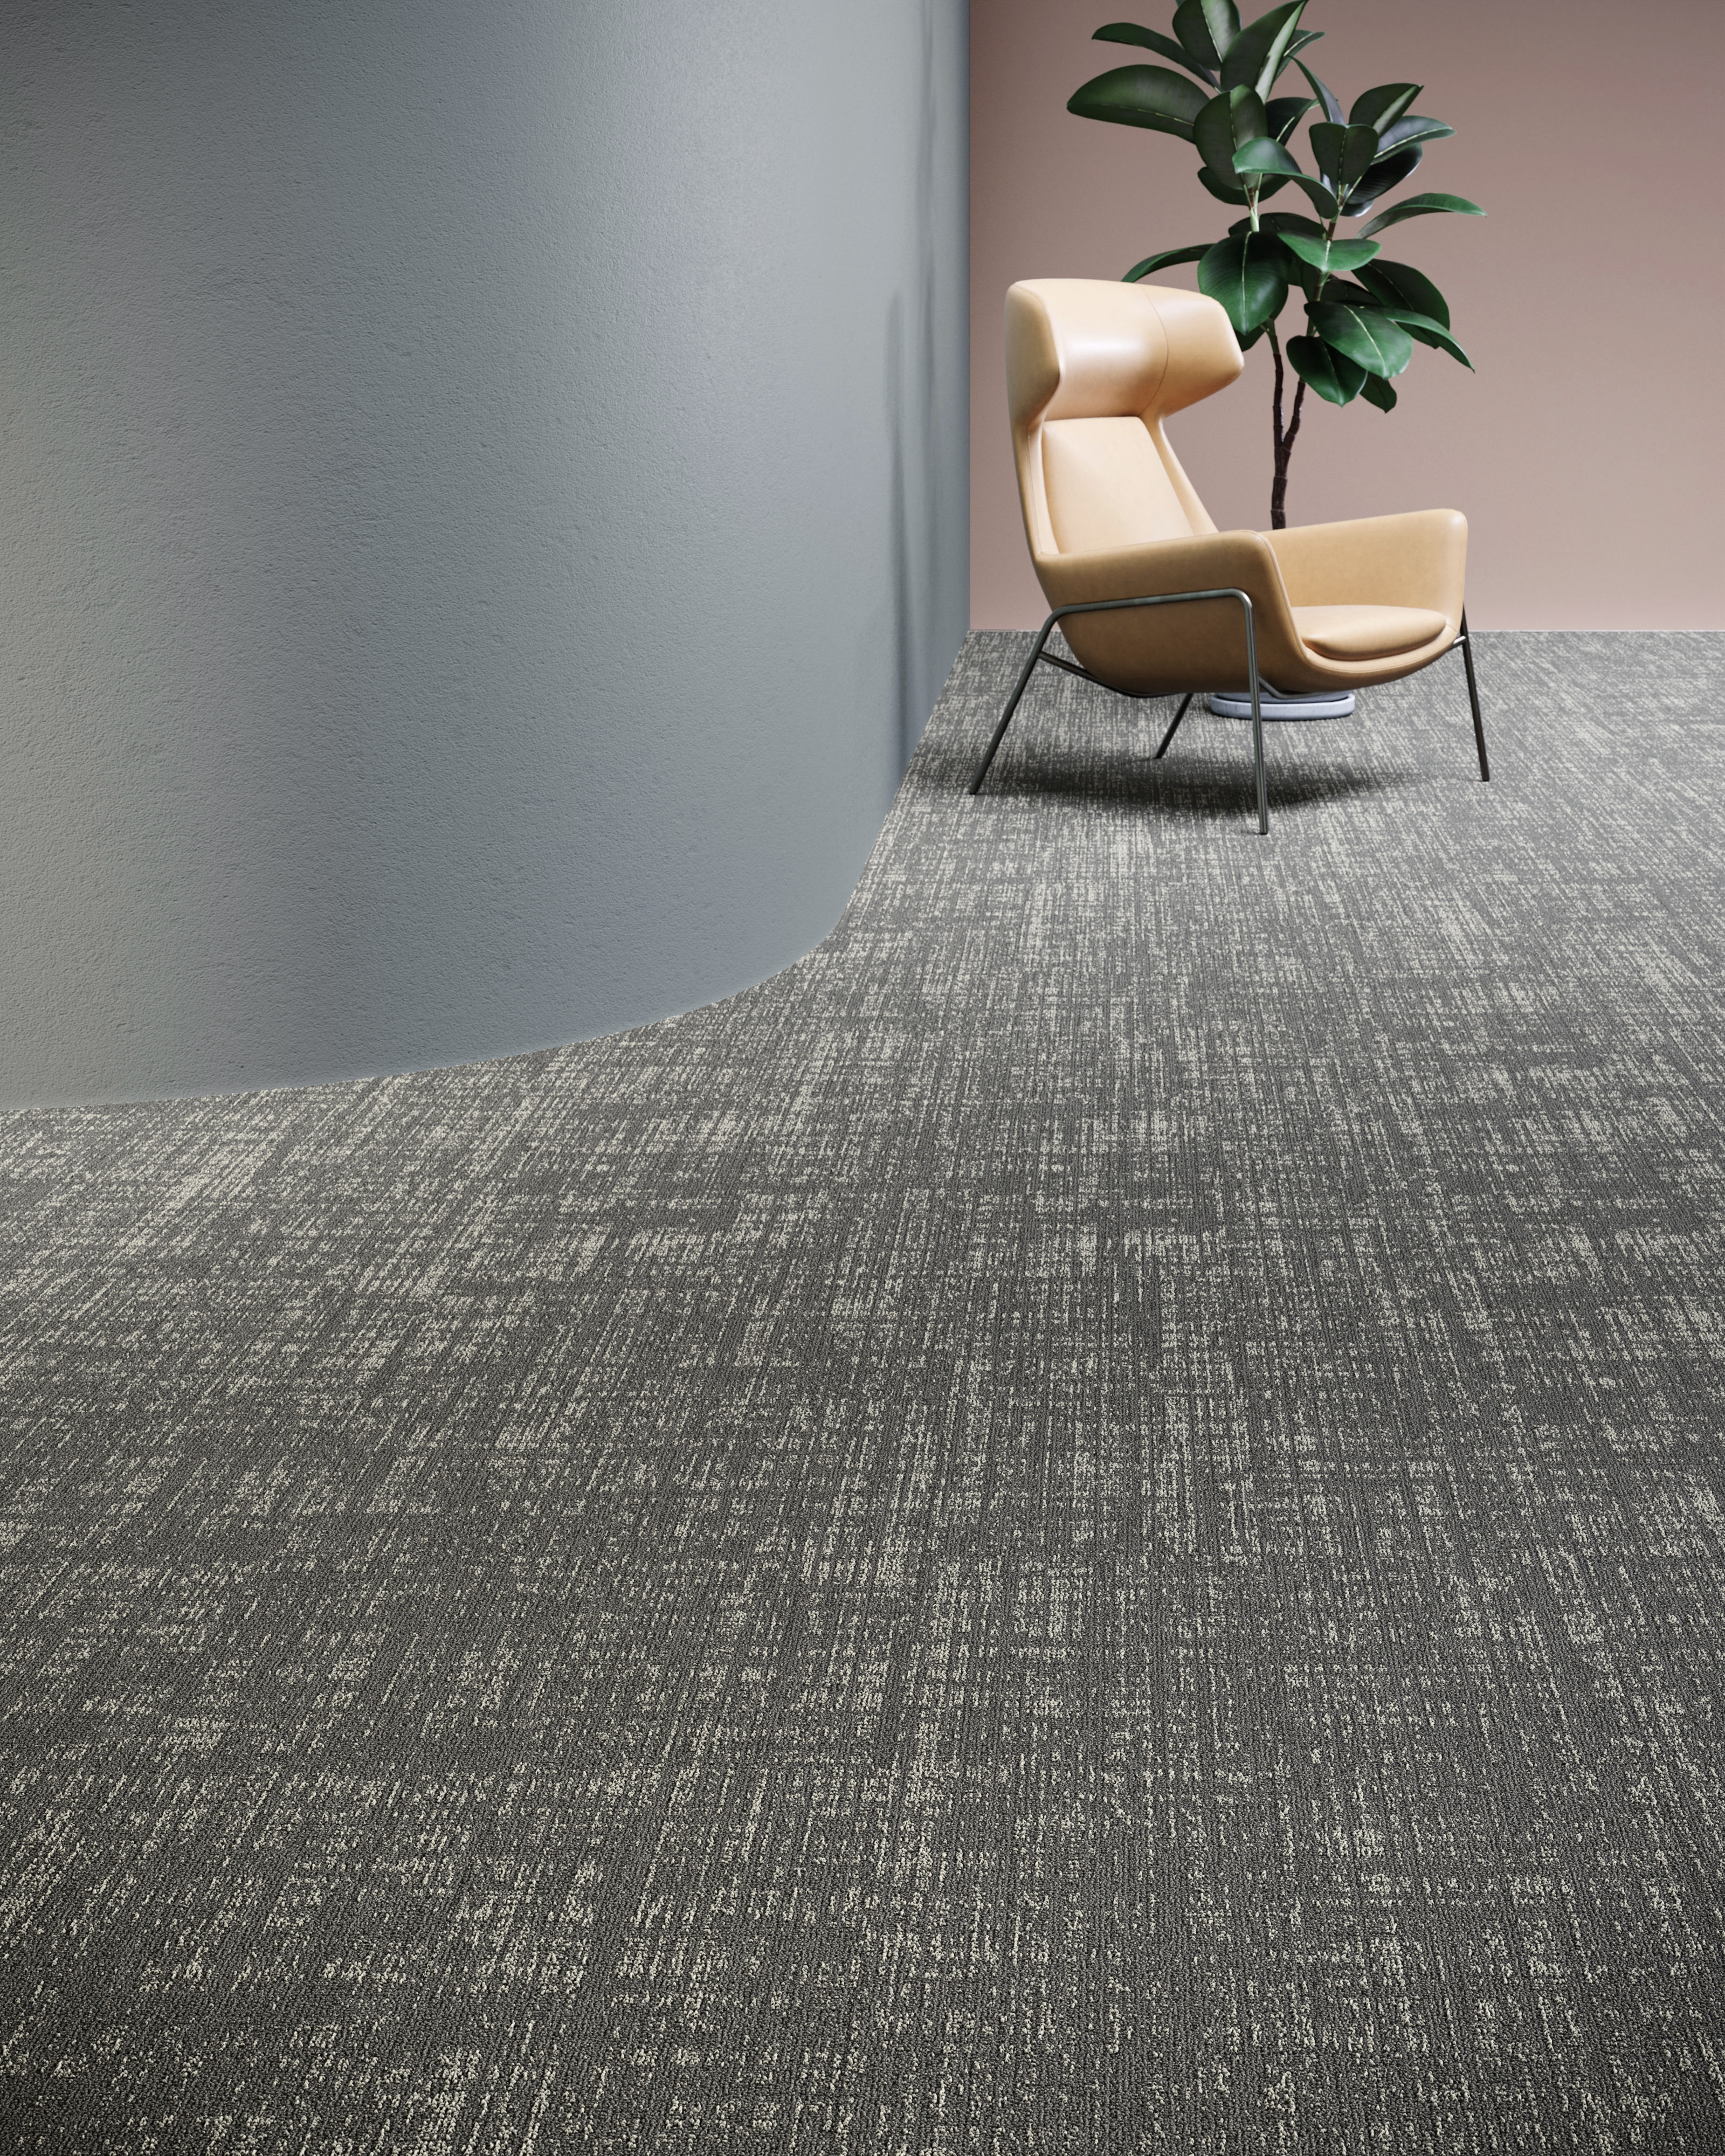 The Need for Sound is a new modular carpet collection inspired by the transformative power of sound that offers an innovative grouping of textures and colors. 
